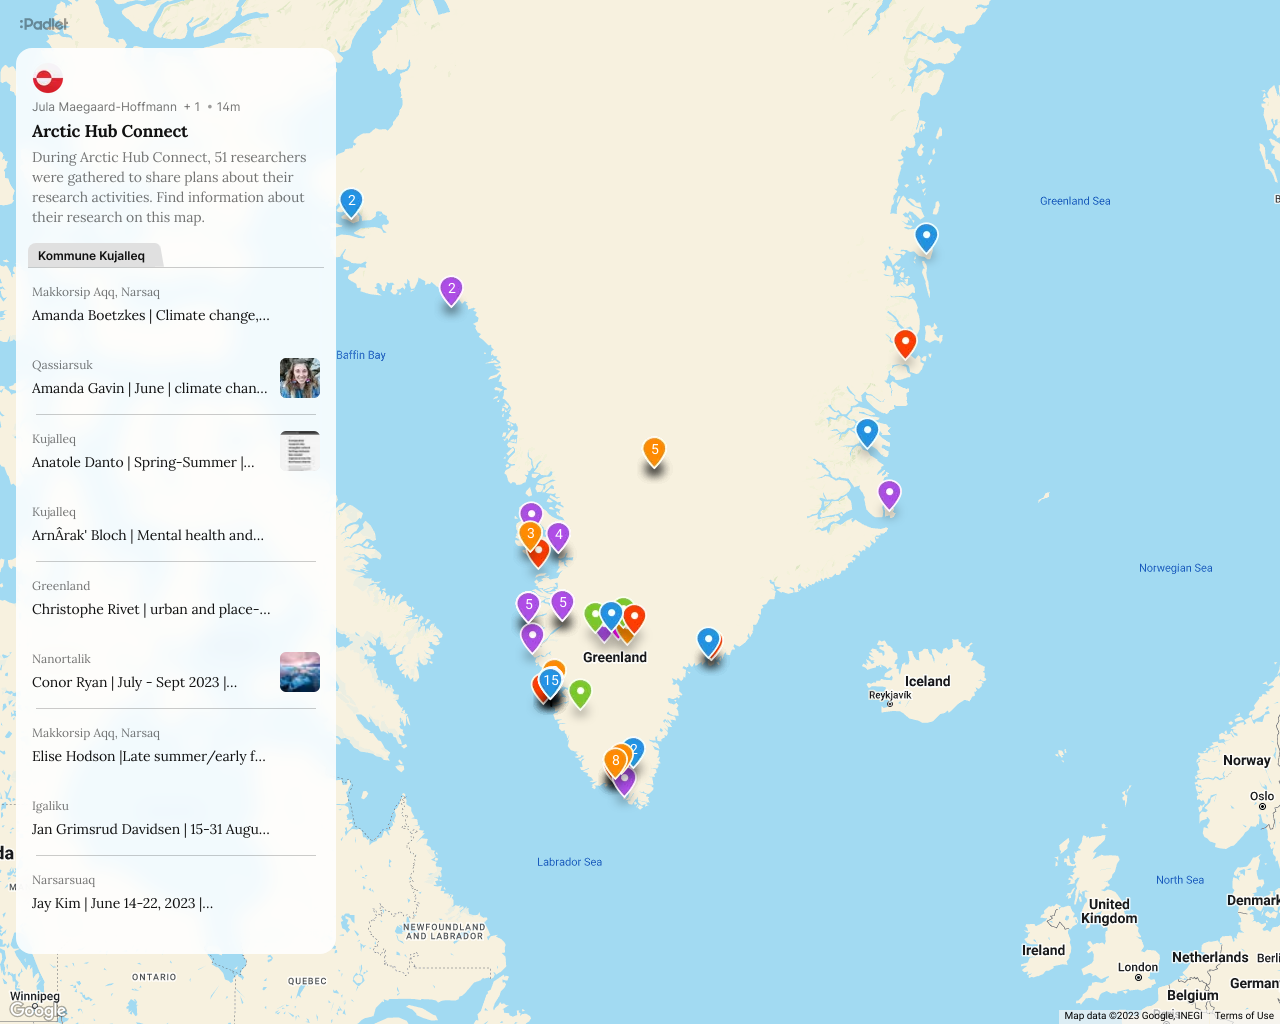 Arctic Hub Connect image over research activities